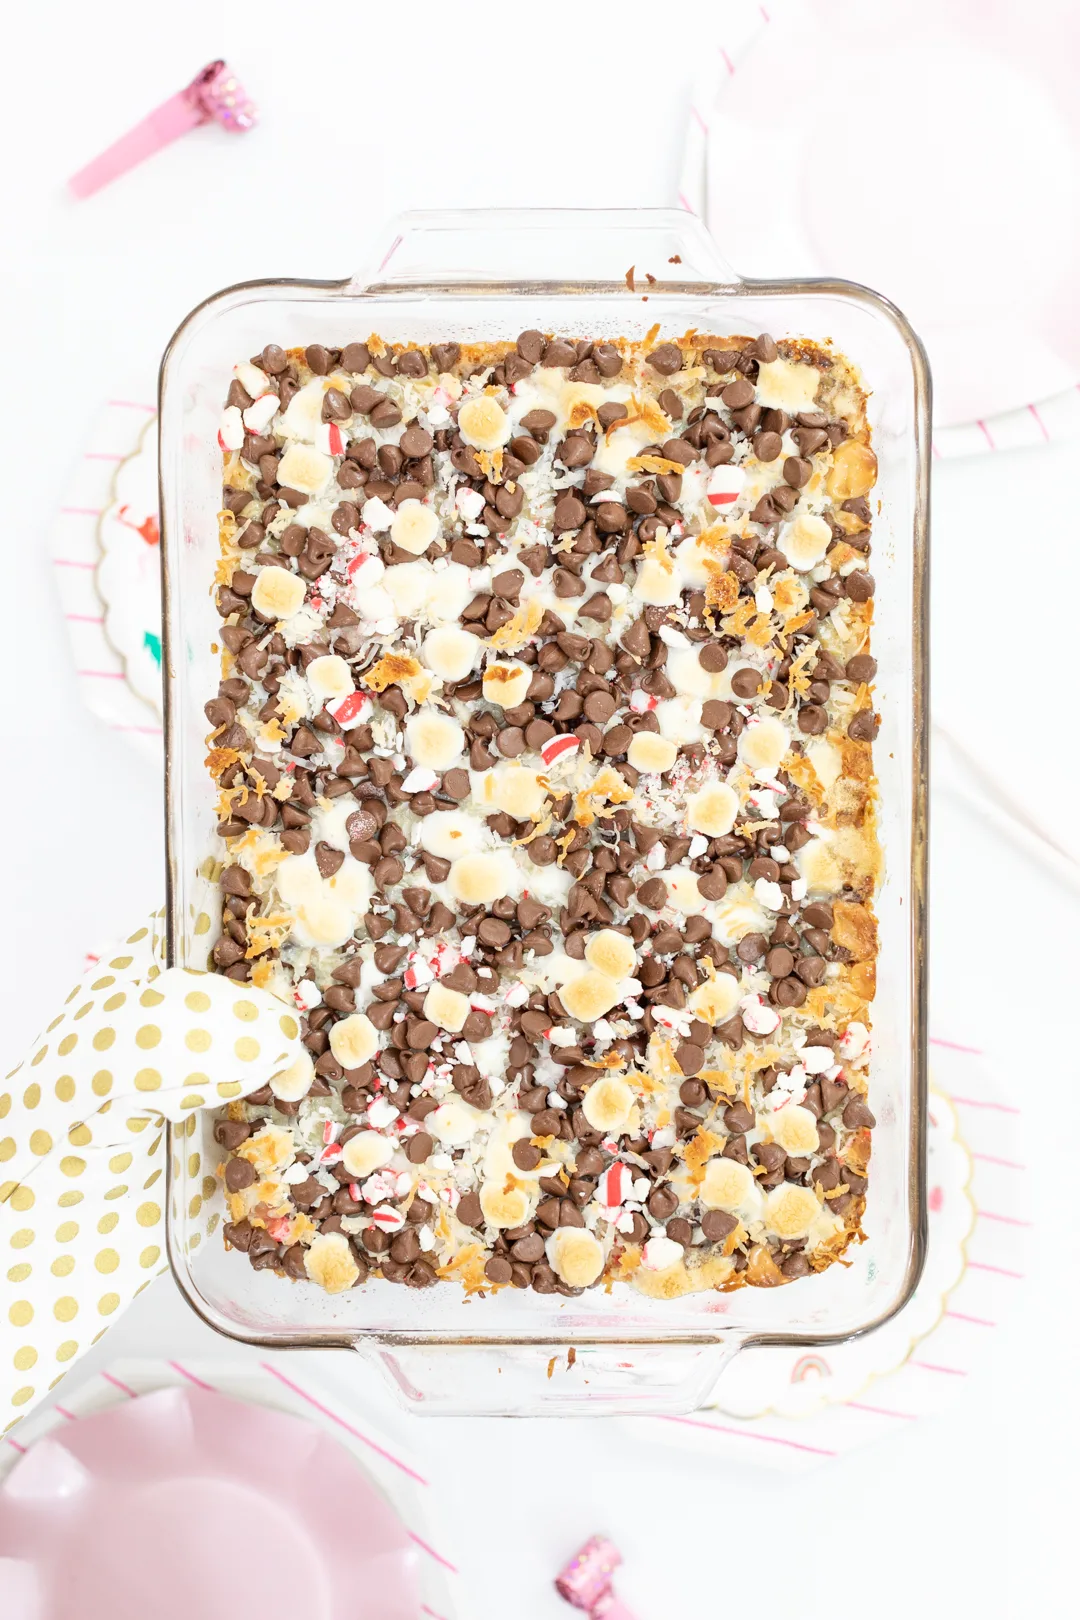 Magic Layer Cookie Bars warmed from the oven in baking dish.